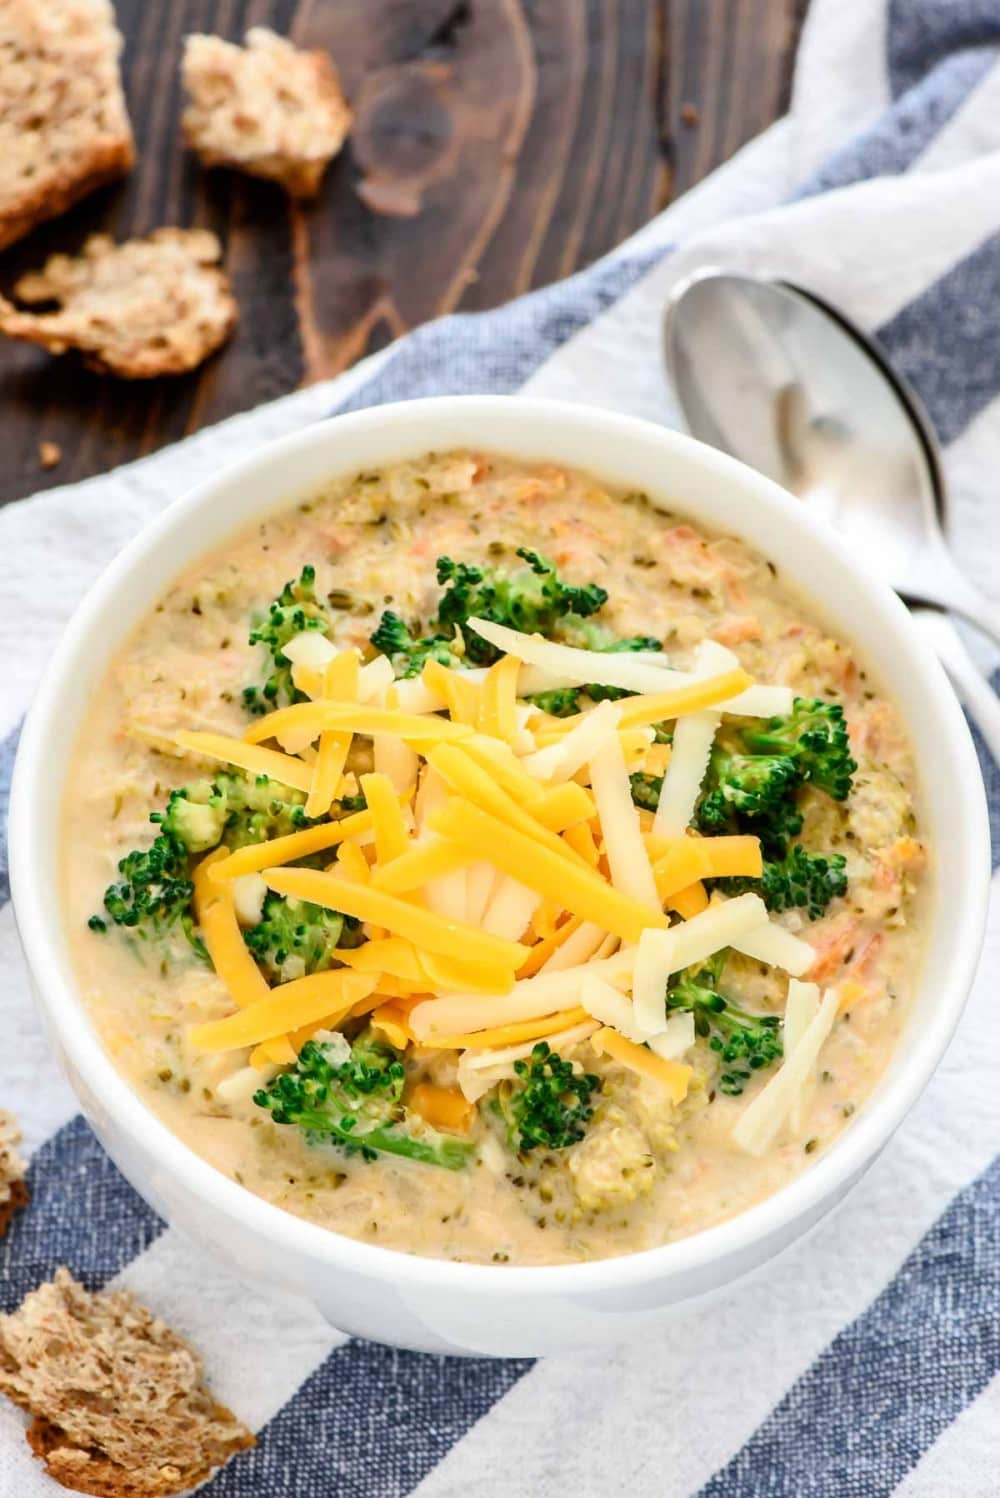 Slow Cooker Broccoli Cheese Soup from wellplated.com on foodiecrush.com